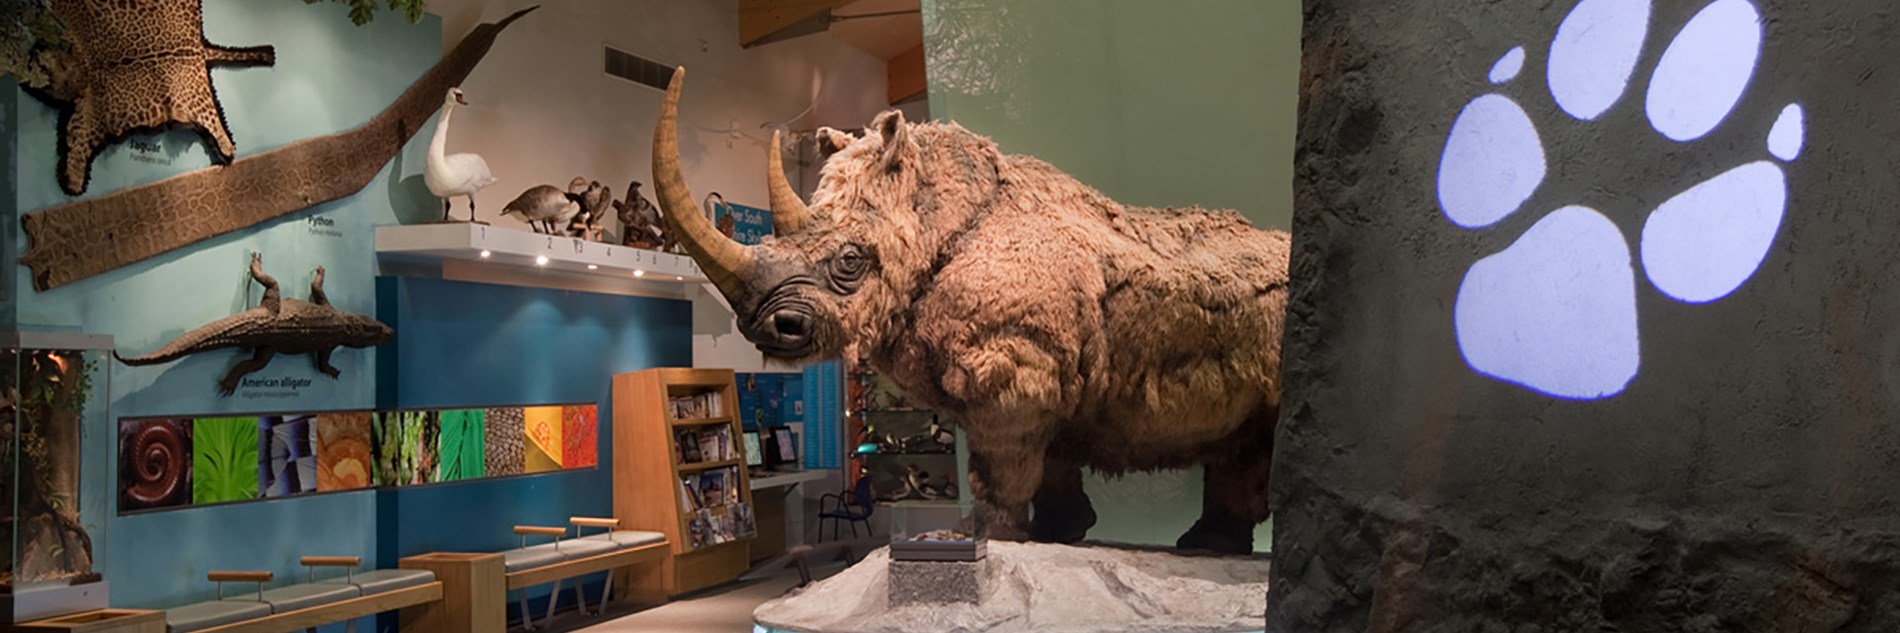 The What On Earth gallery with various taxidermized animals and birds on the wall. The centerpiece is a lifesized model of a Woolly Rhino.